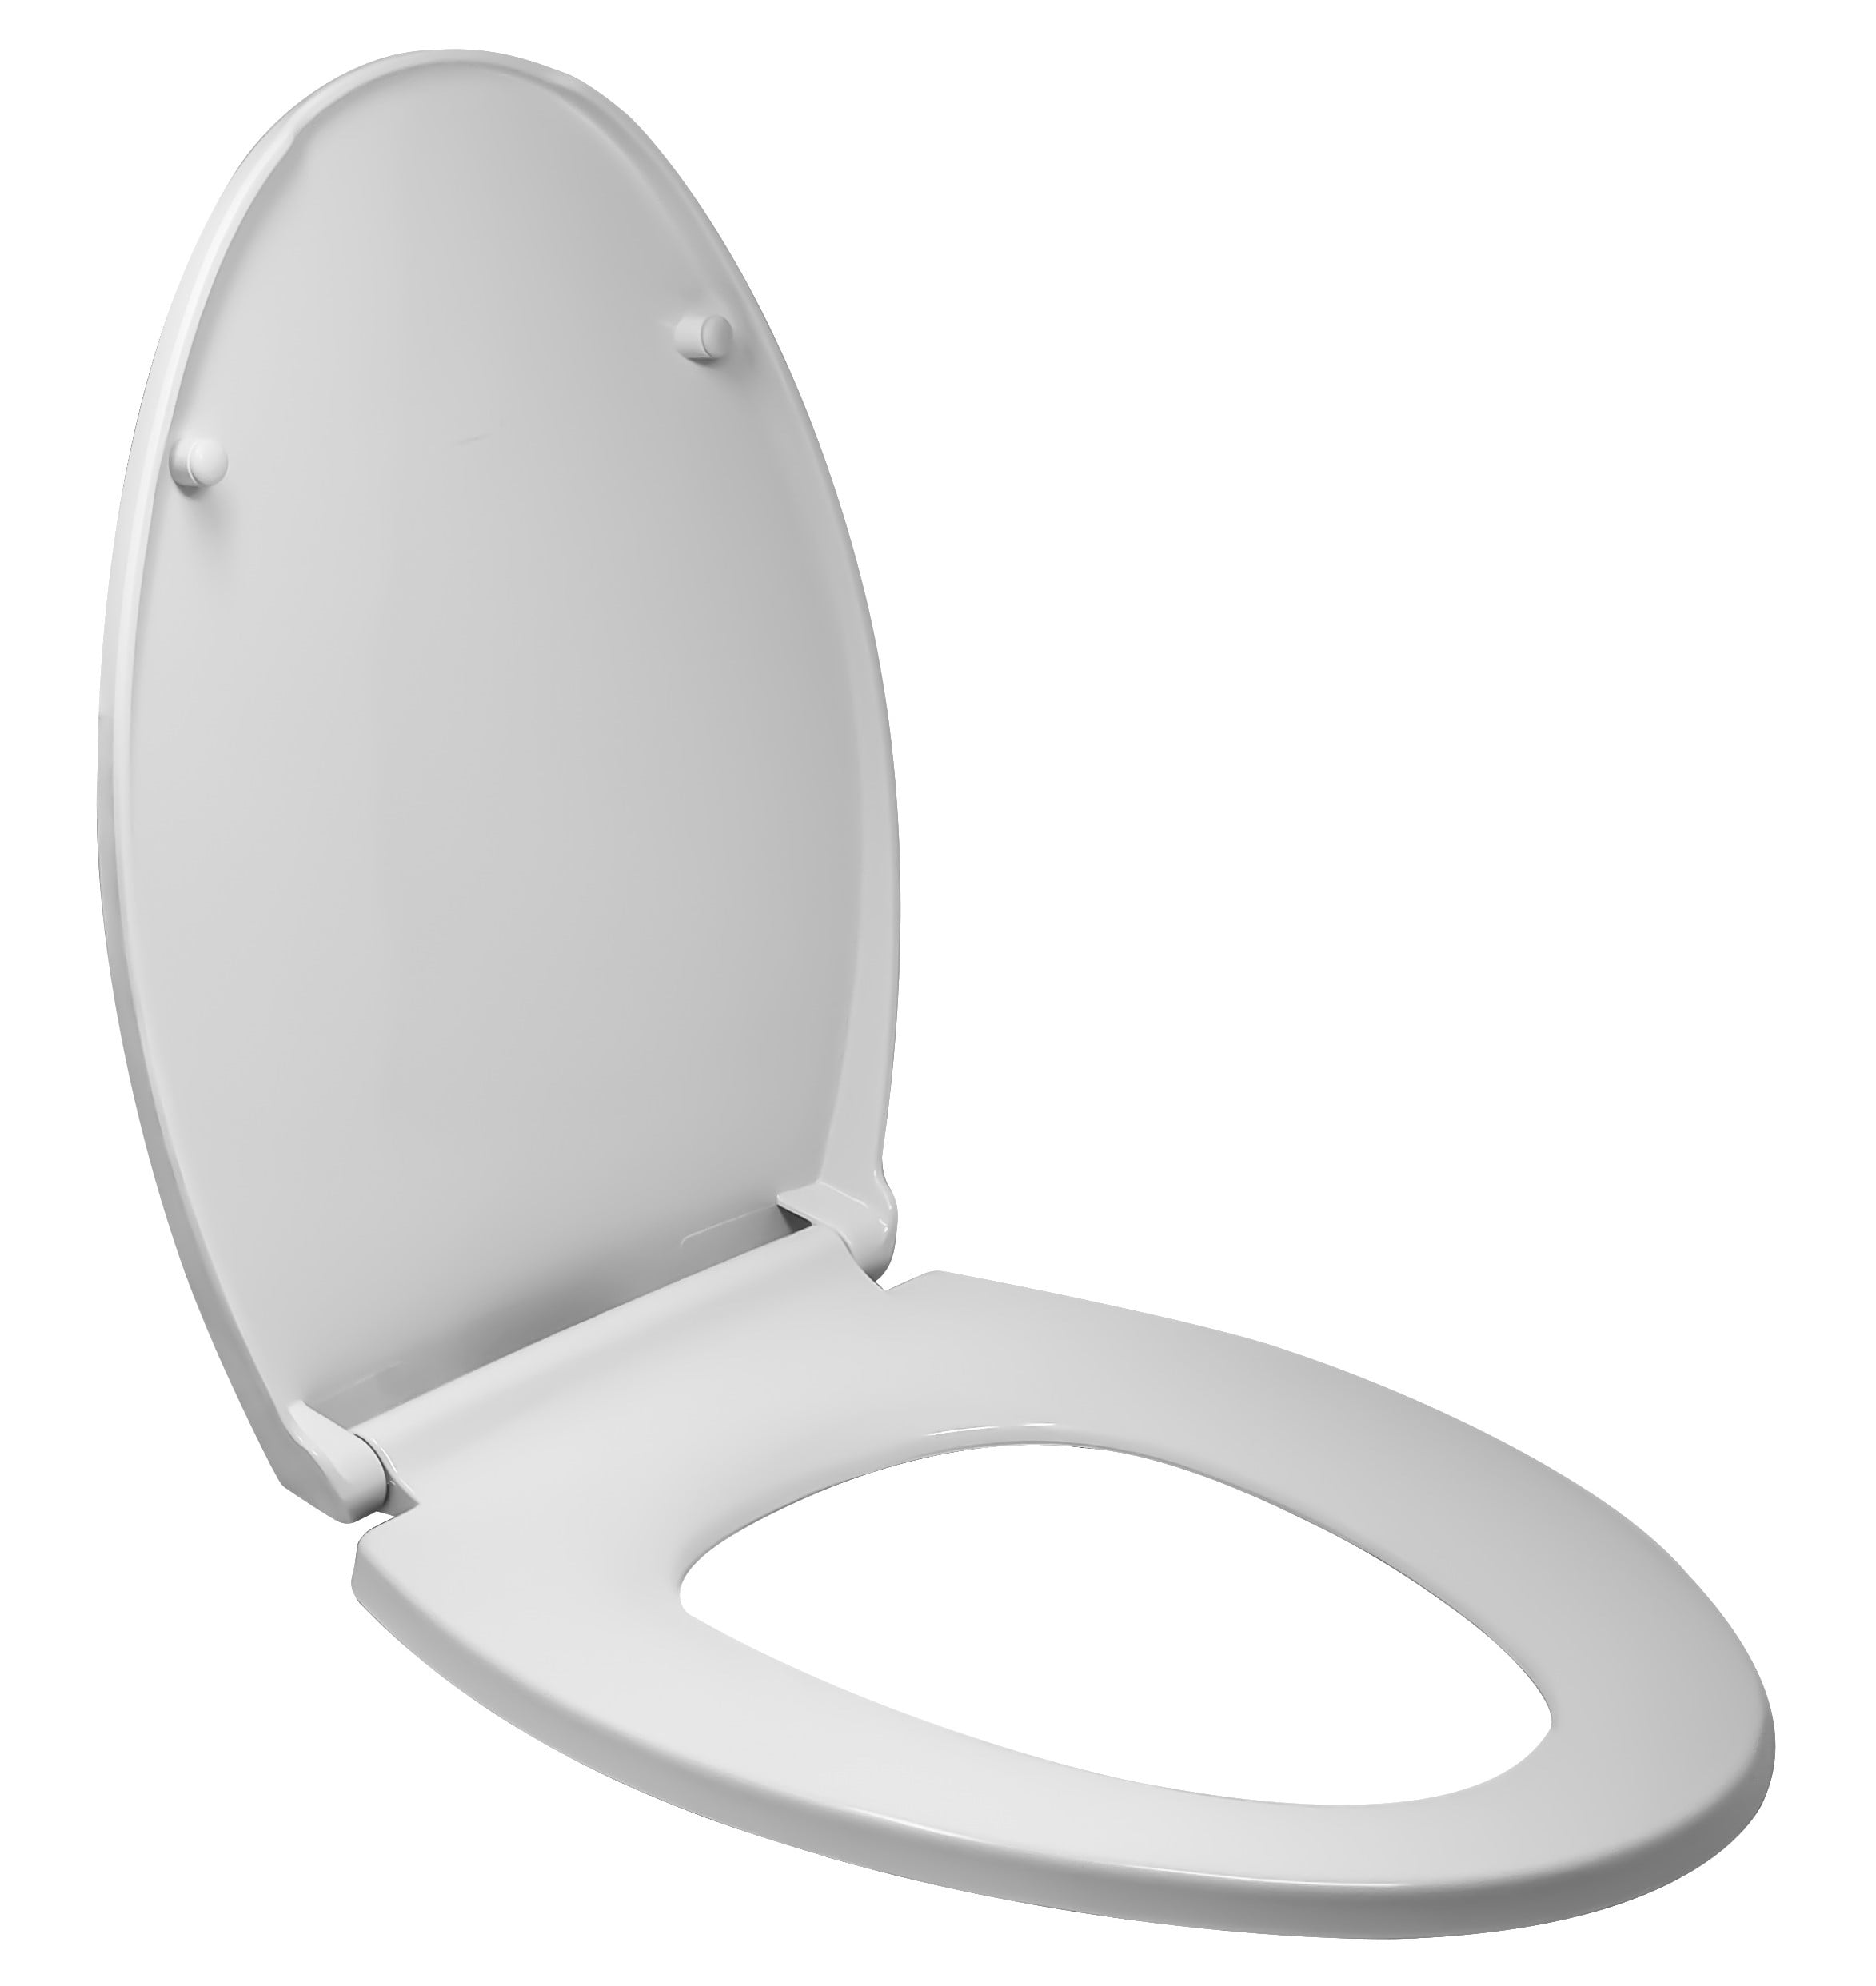 LibraS Heavy Duty Soft Close Elongated Toilet Seat Cover Easy Install & Clean